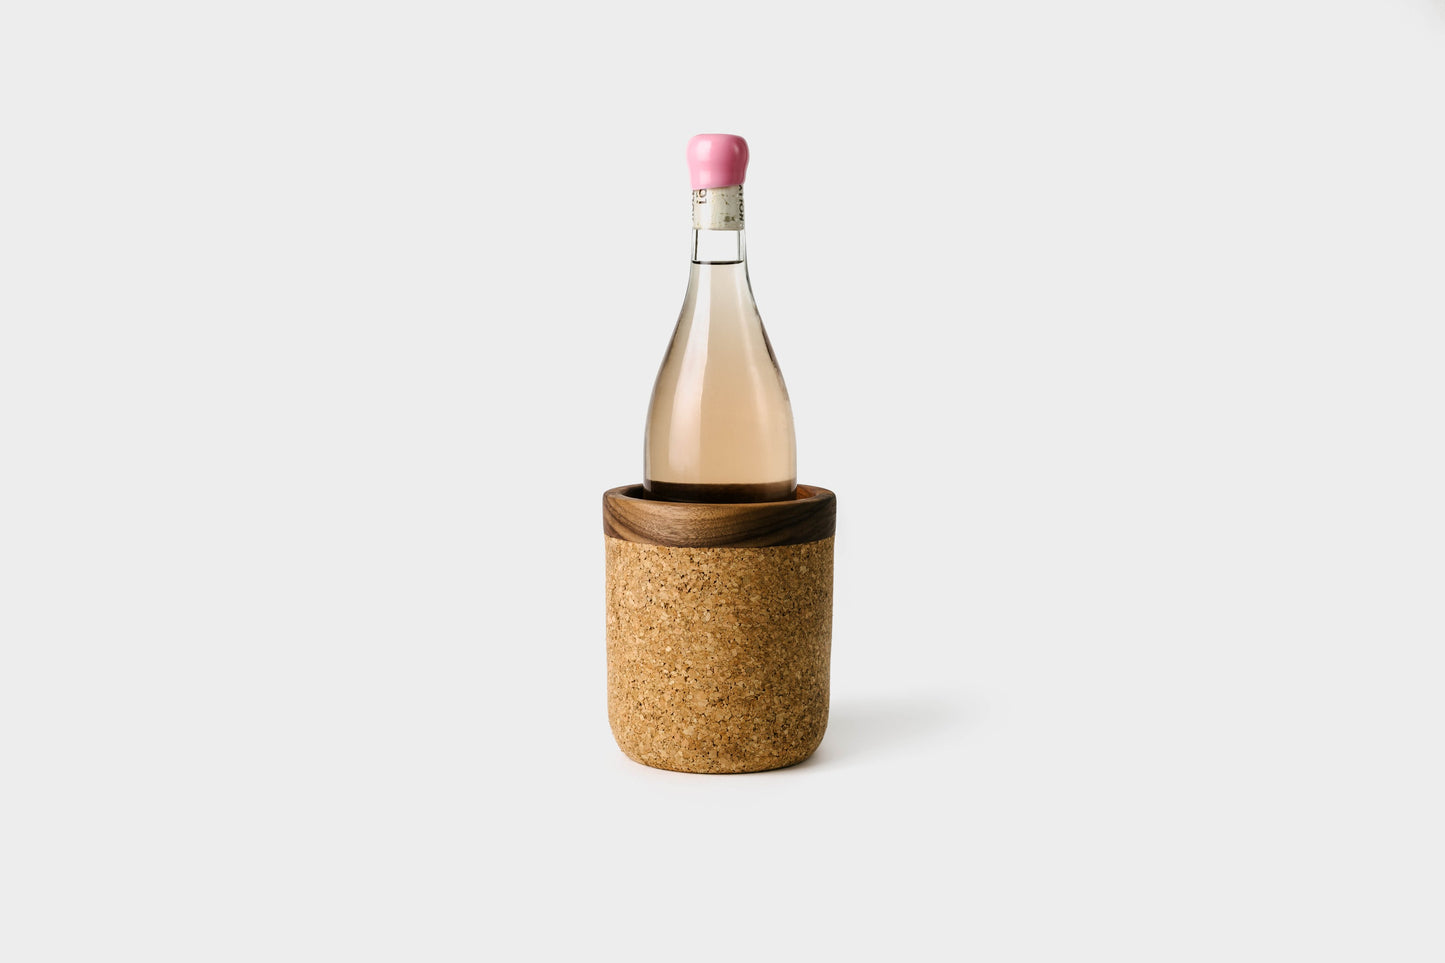 Cork wine cooler in the natural cork and walnut trim. With rose bottle inside. By Melanie Abrantes Designs.